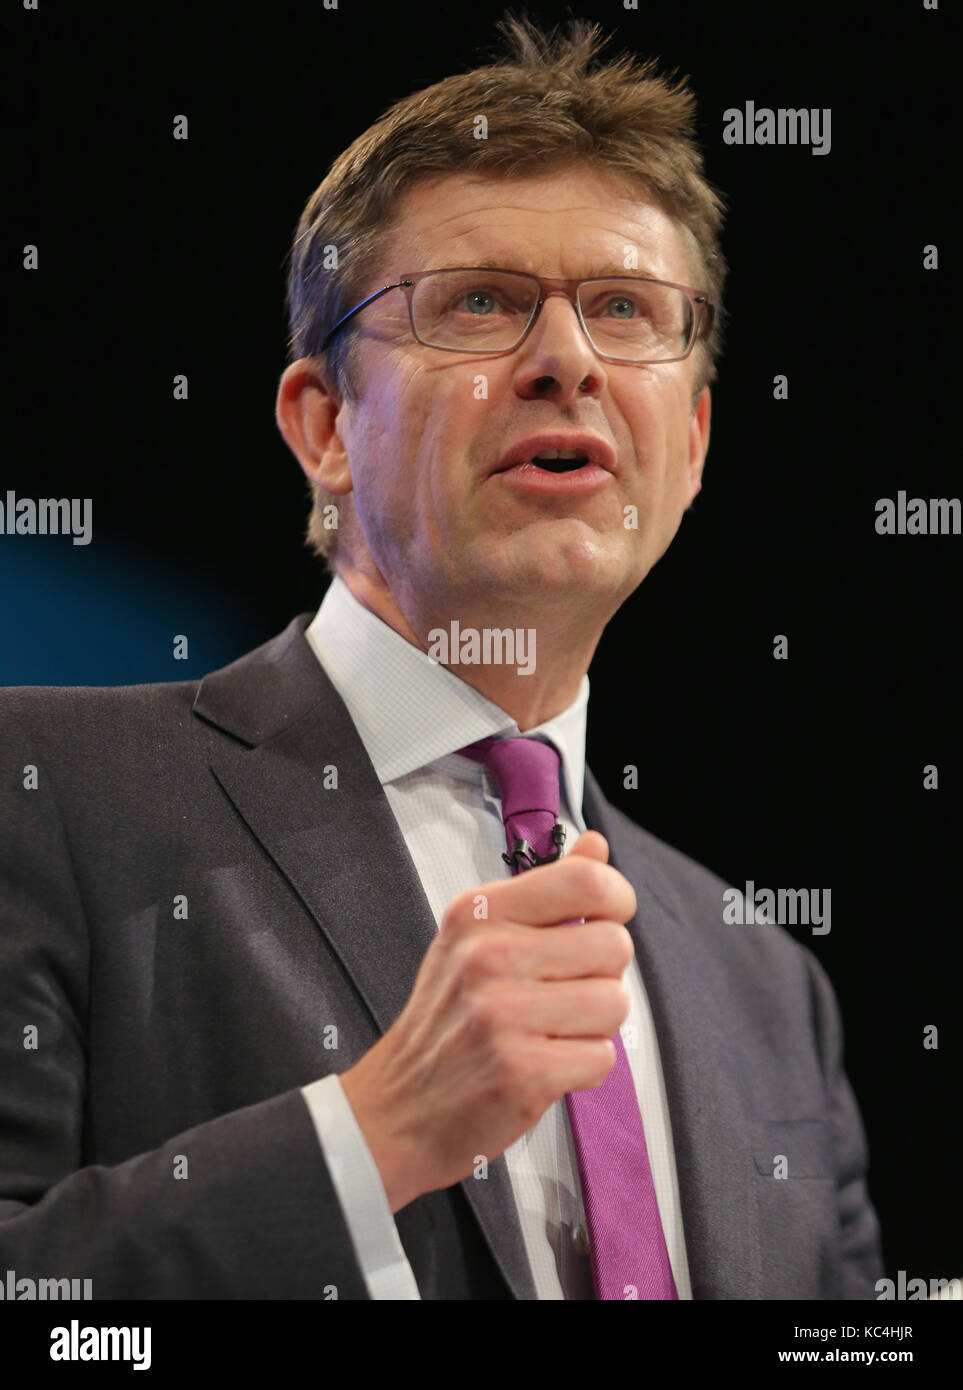 Greg Clark Mp Secretary Of State For Business, Energy And Industrial Strategy Conservative Party Conference 2017 Manchester Central, Manchester, England 02 October 2017 Addresses The Conservative Party Conference 2017 At Manchester Central, Manchester, England Credit: Allstar Picture Library/Alamy Live News Stock Photo